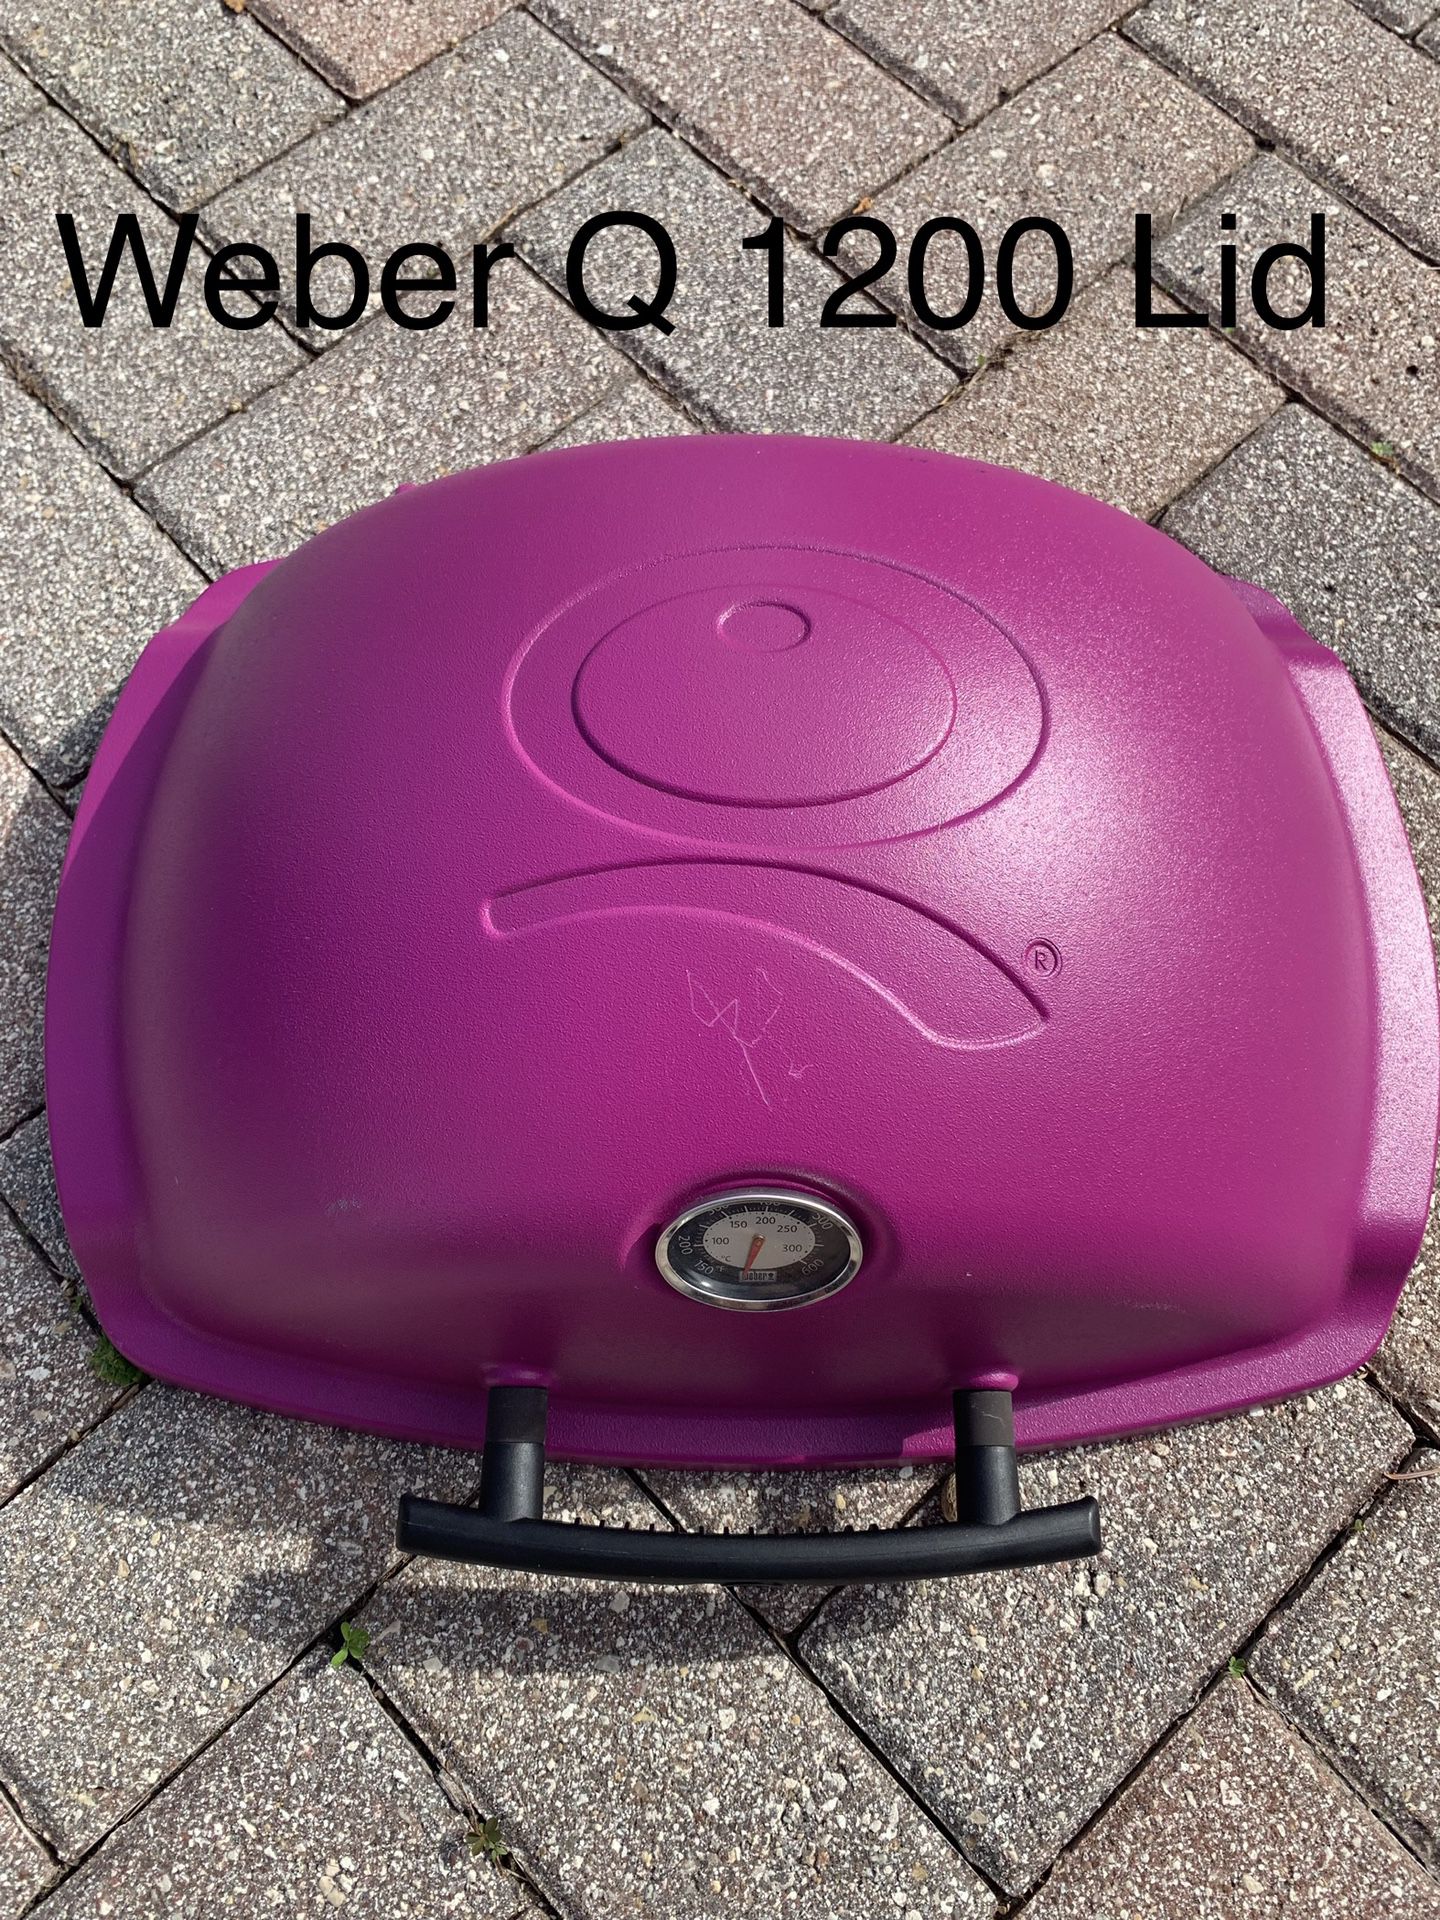 Weber Q 1200 gas grill lids for Q1200